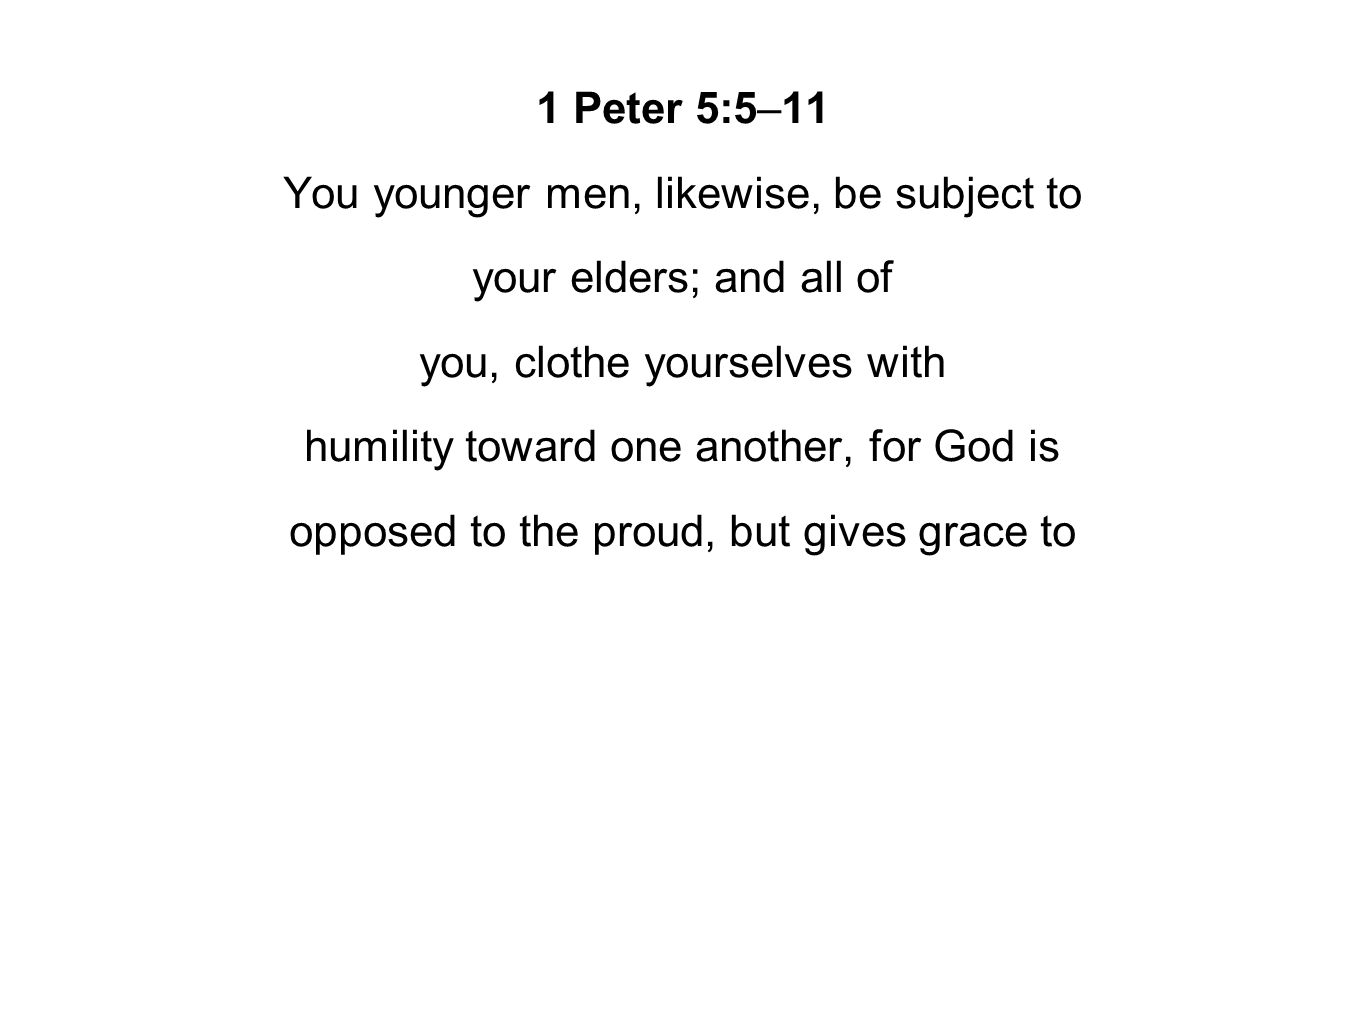 1 Peter 5:5–11 You younger men, likewise, be subject to your elders; and all of you, clothe yourselves with humility toward one another, for God is opposed to the proud, but gives grace to